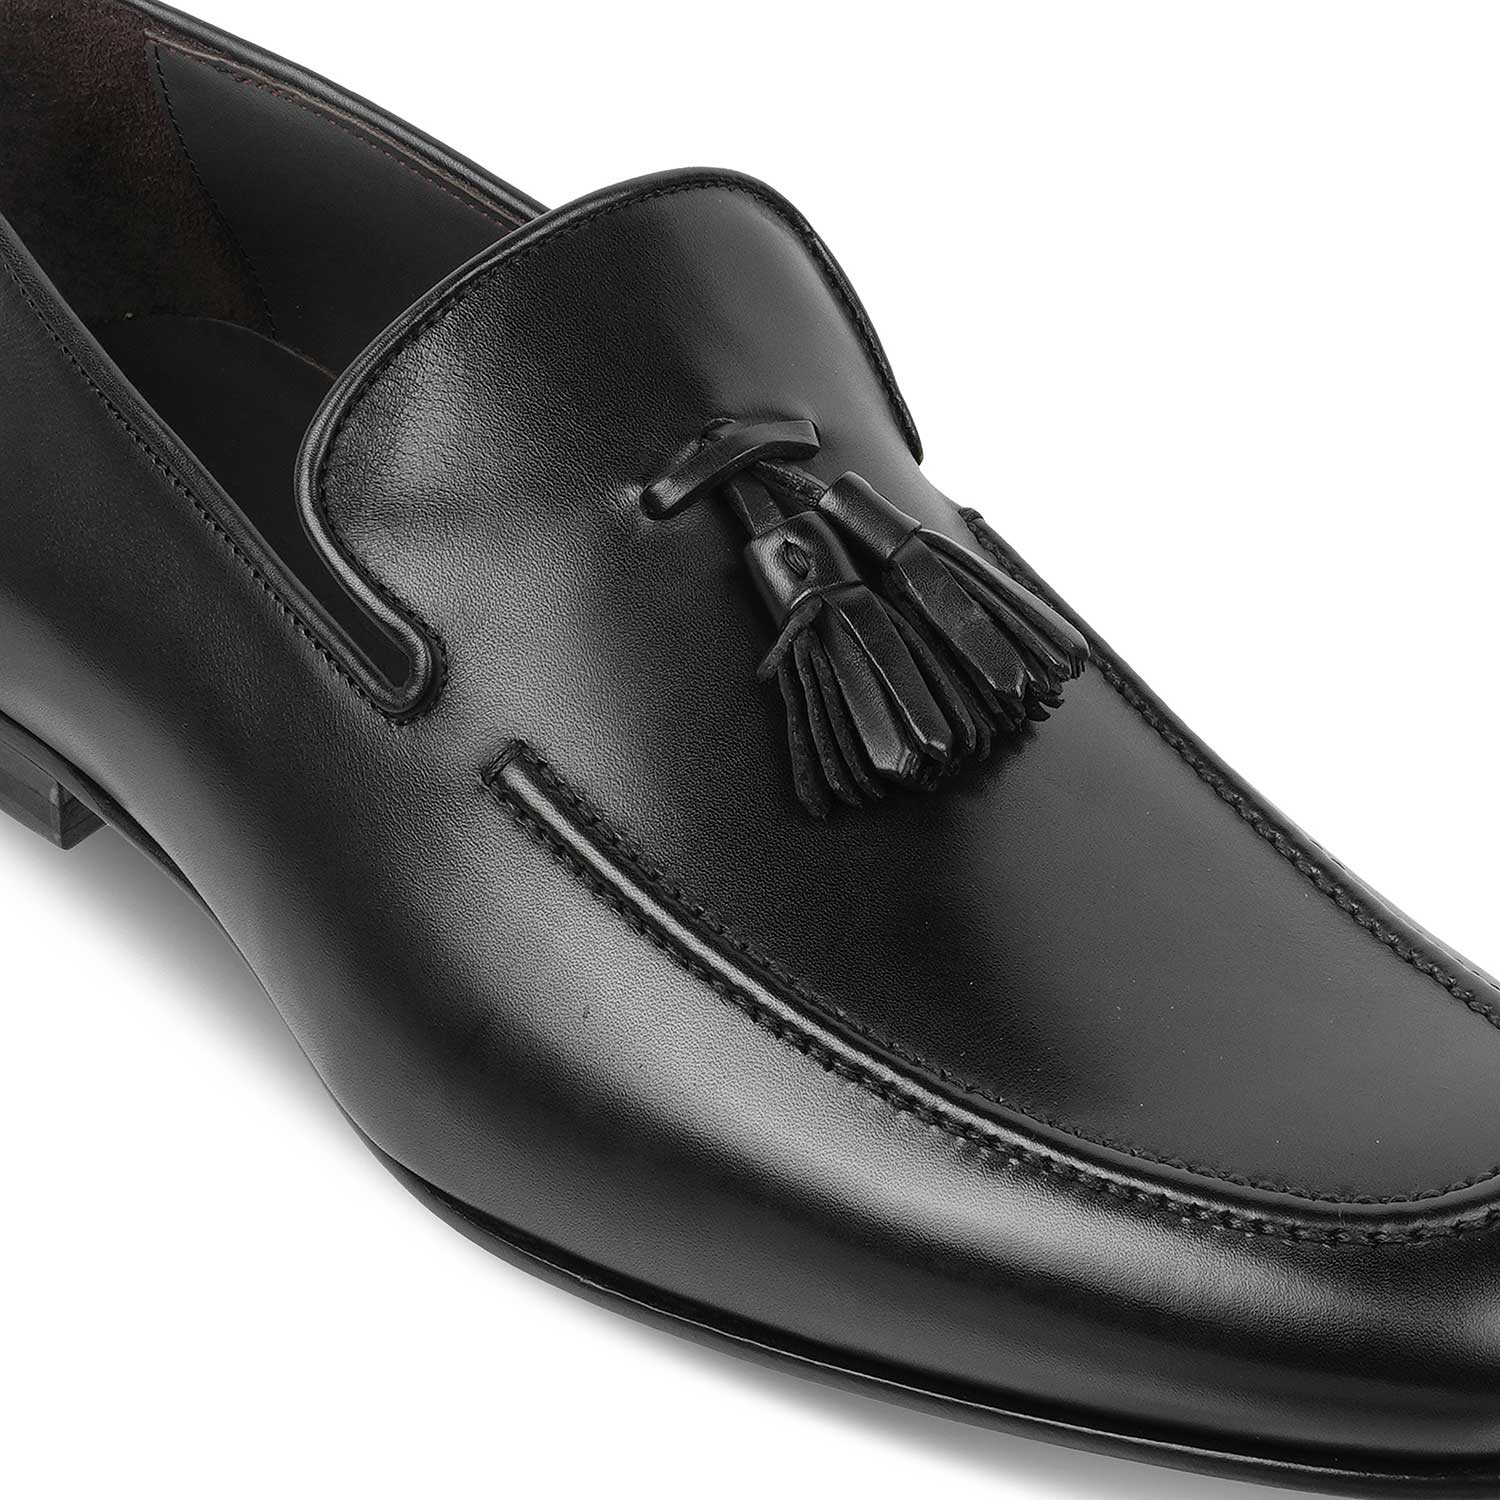 The Mancio Black Men's Handcrafted Leather Loafers Tresmode - Tresmode